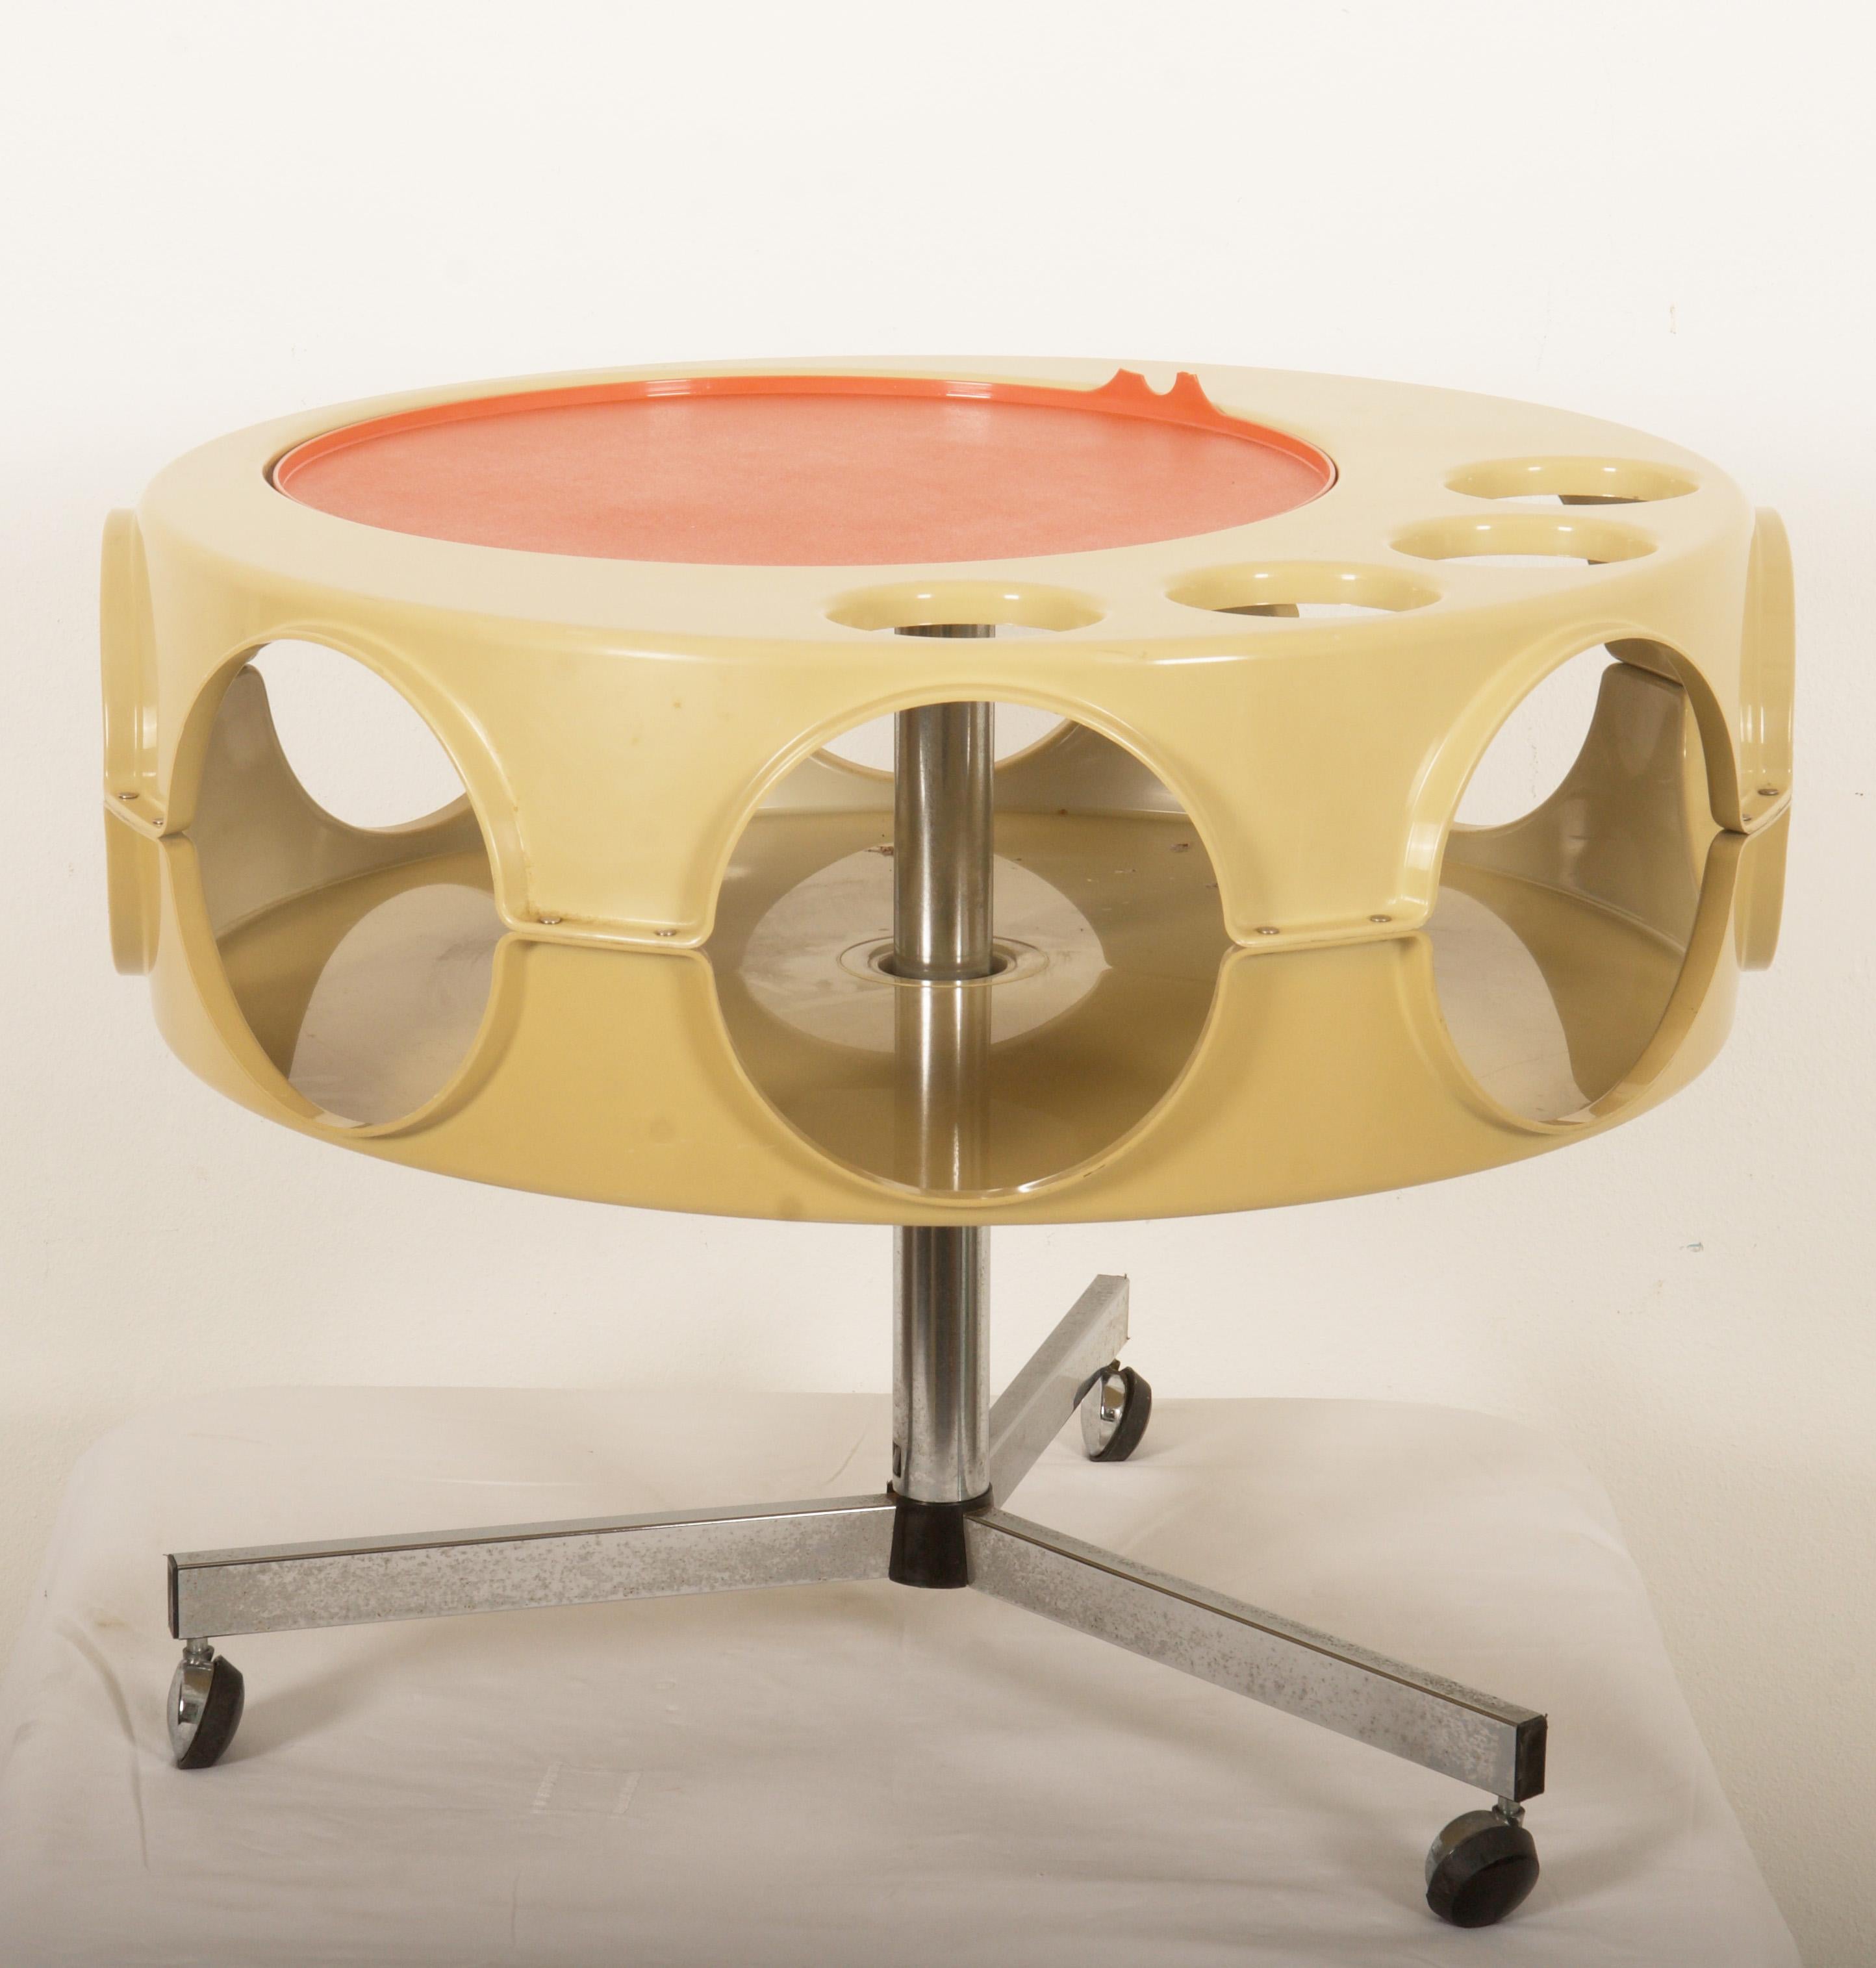 Unique 'rotobar' bar table from curver Netherlands from the 1970s. The table is rotatable and movable. With a number of practical compartments for, for example, drink bottles in combination with glasses. The orange/red plastic table has the typical